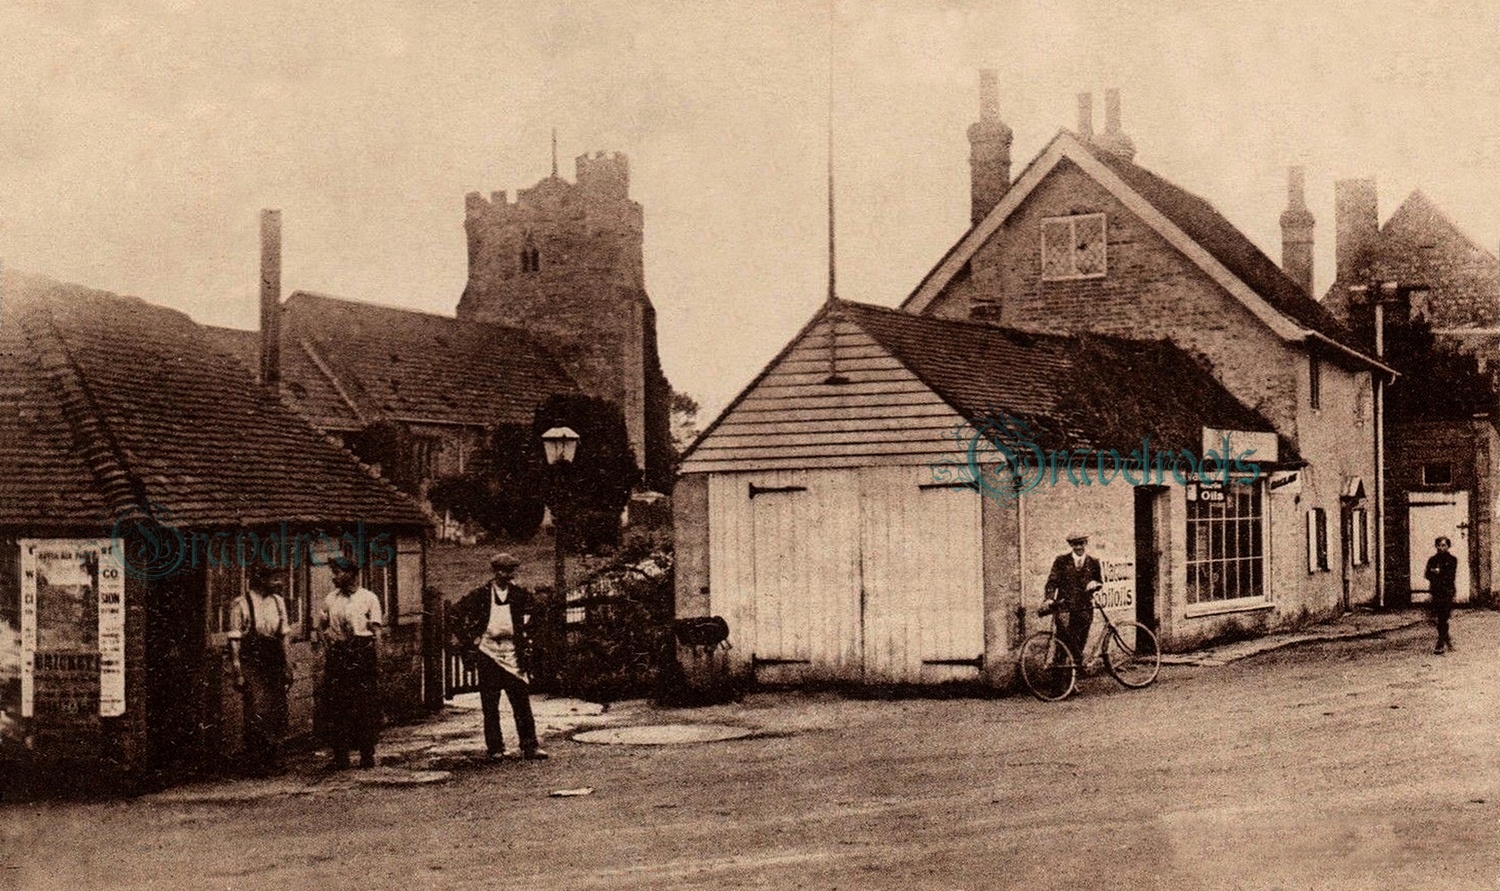 Station Road, Cowfold, Sussex - click image to return